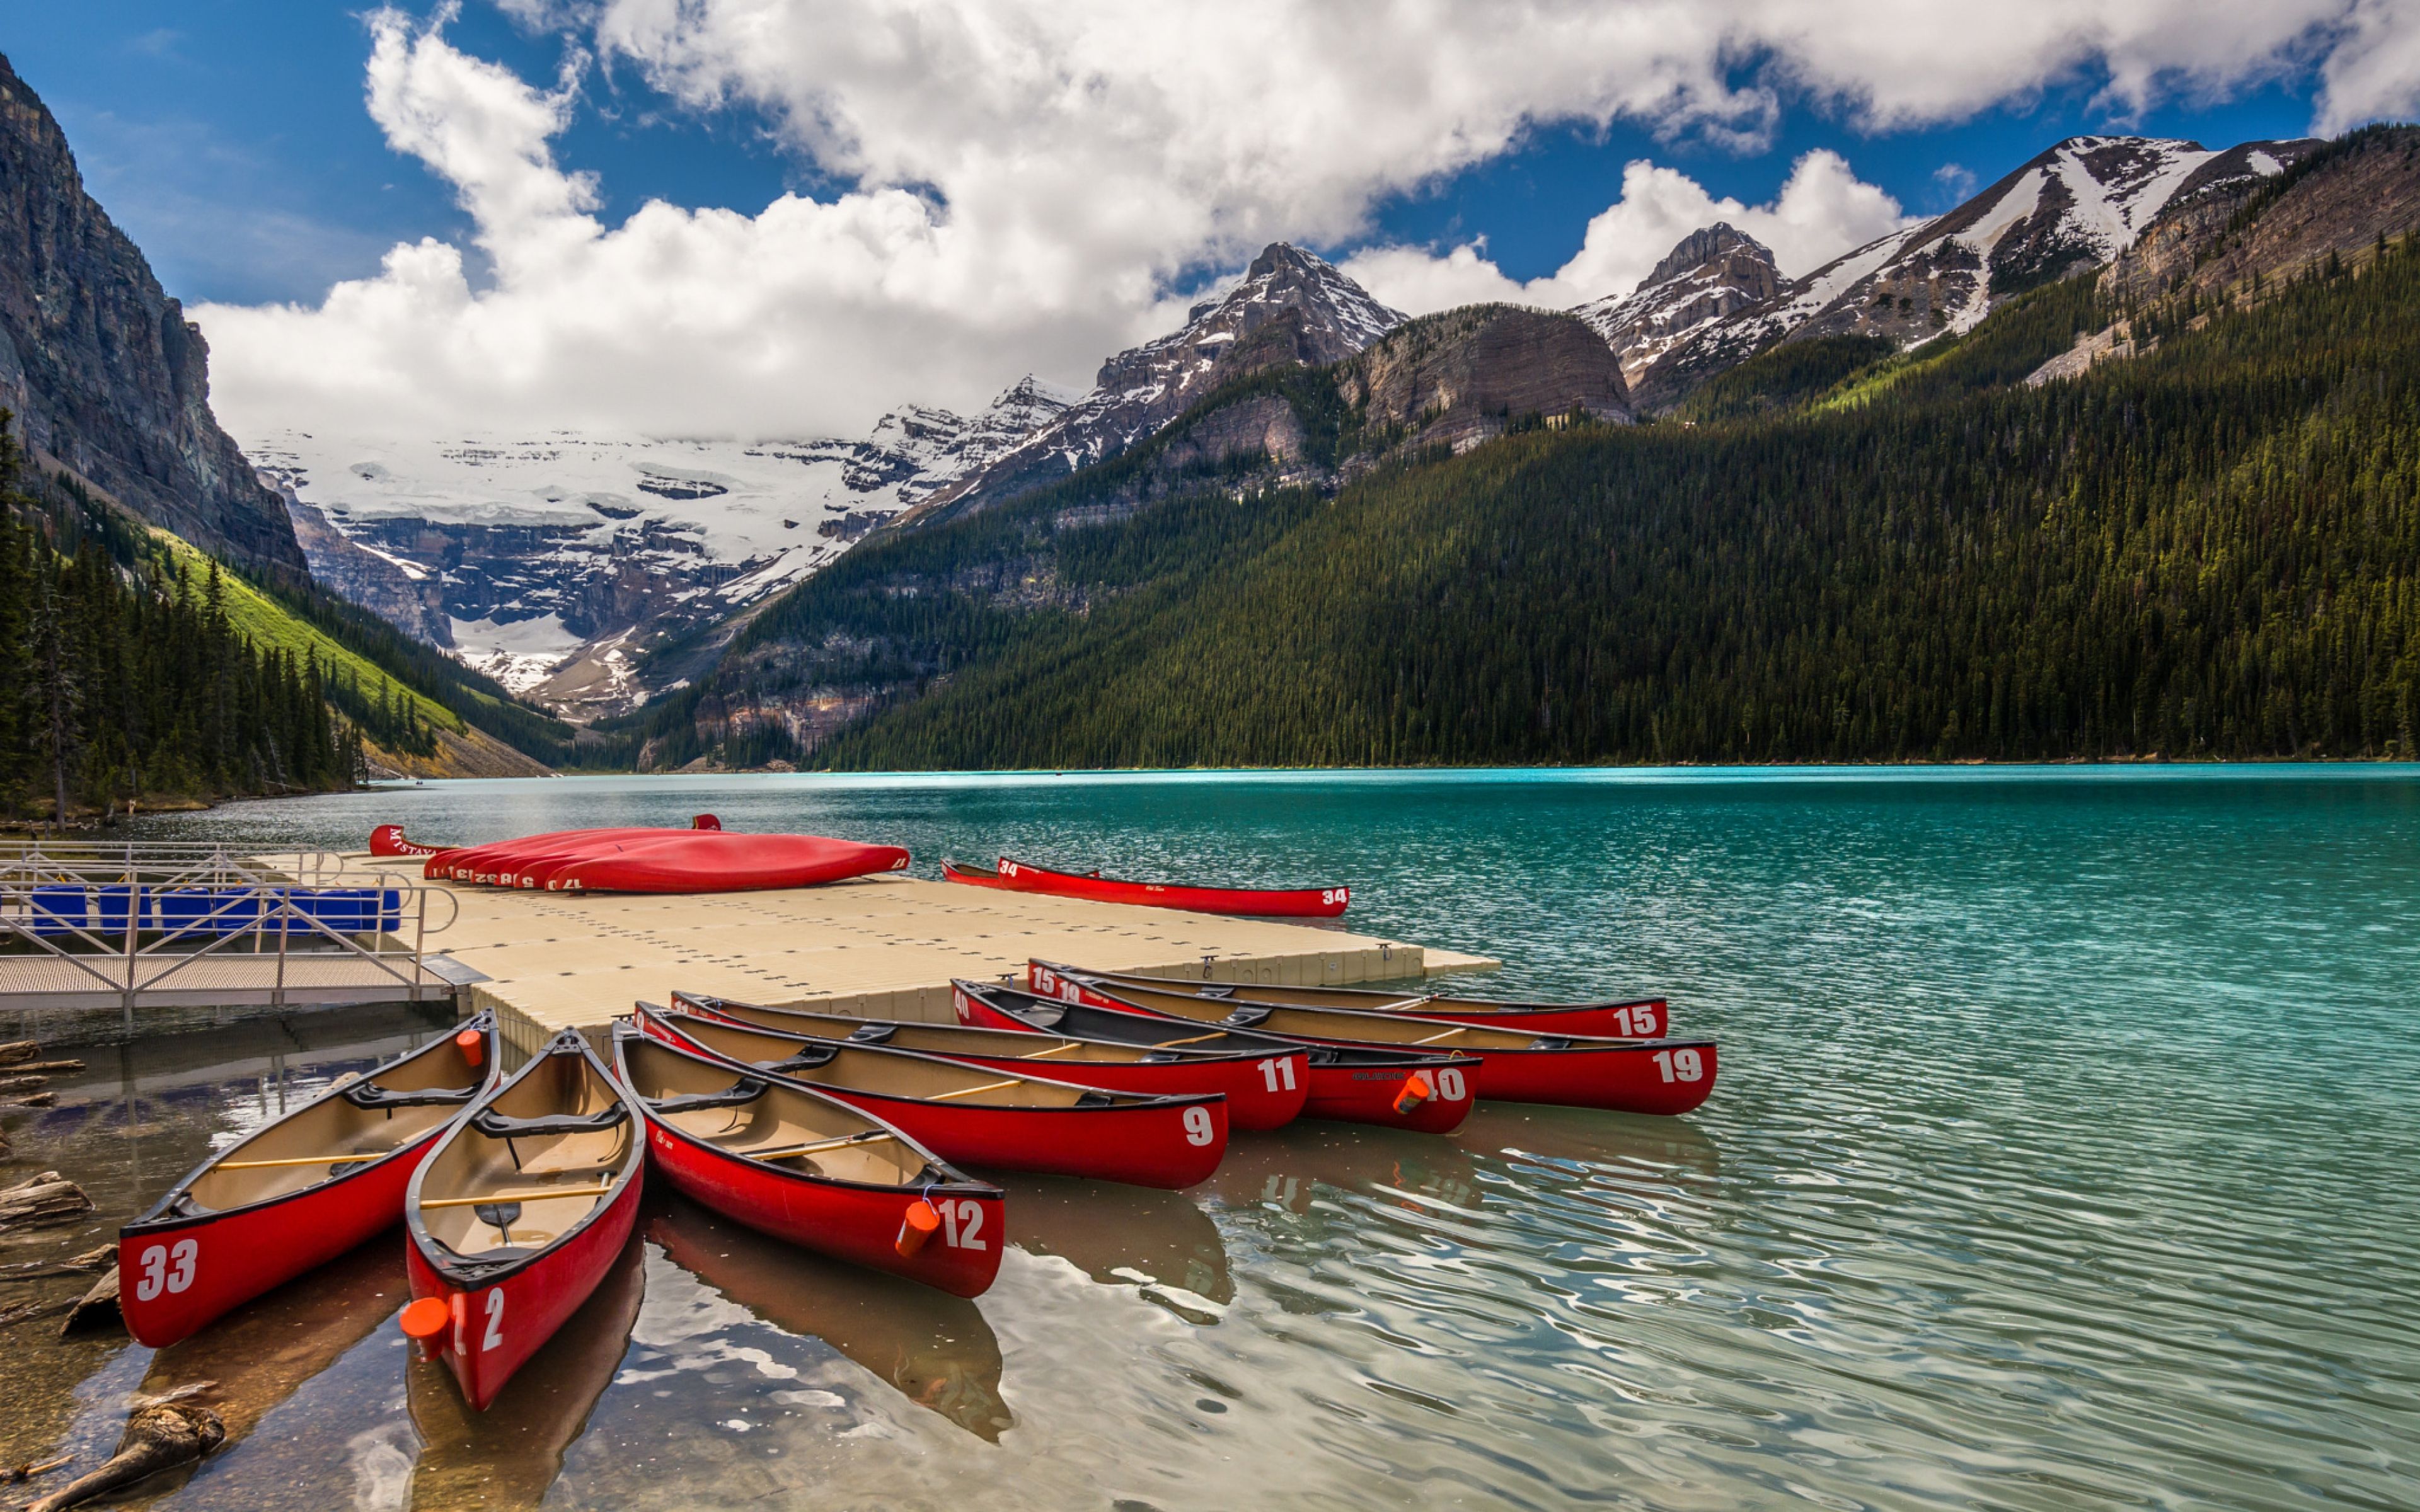 Lake Louise Is A Hamlet In Alberta Canada Banff National Park Marina Mountains Canoe Sky And White Cloud HD Wallpaper, Wallpaper13.com